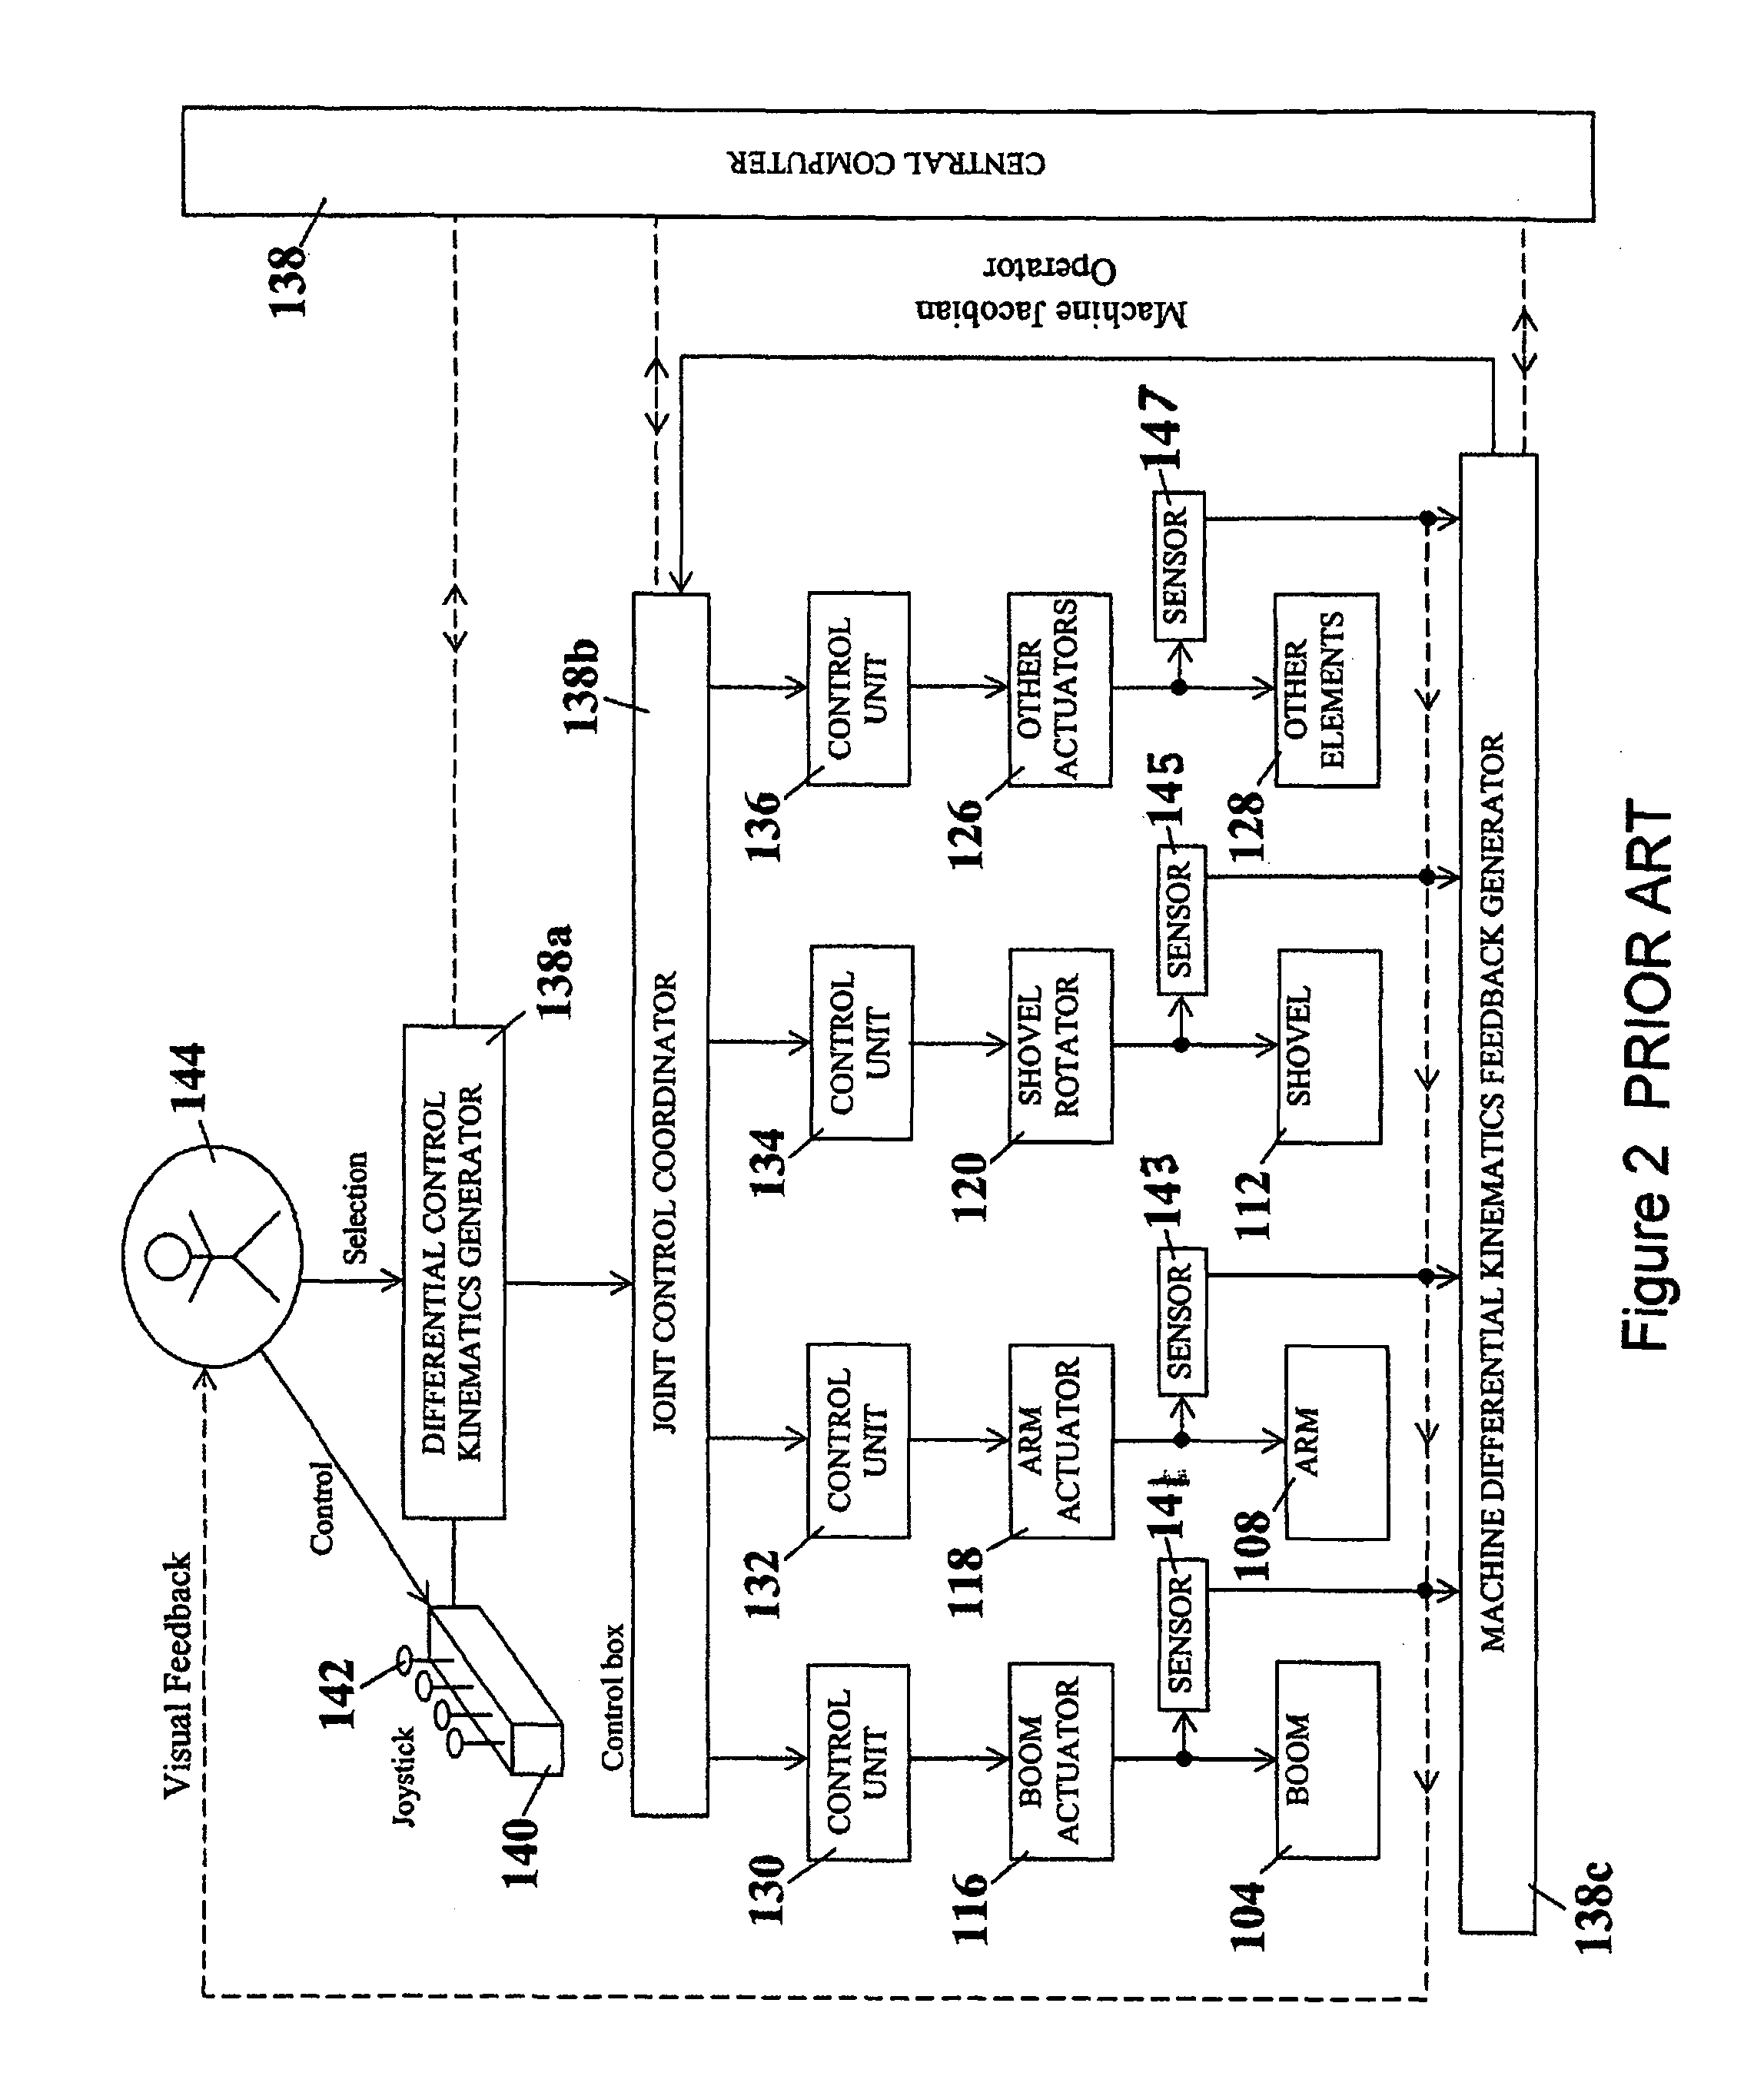 Coordinated joint motion control system with position error correction